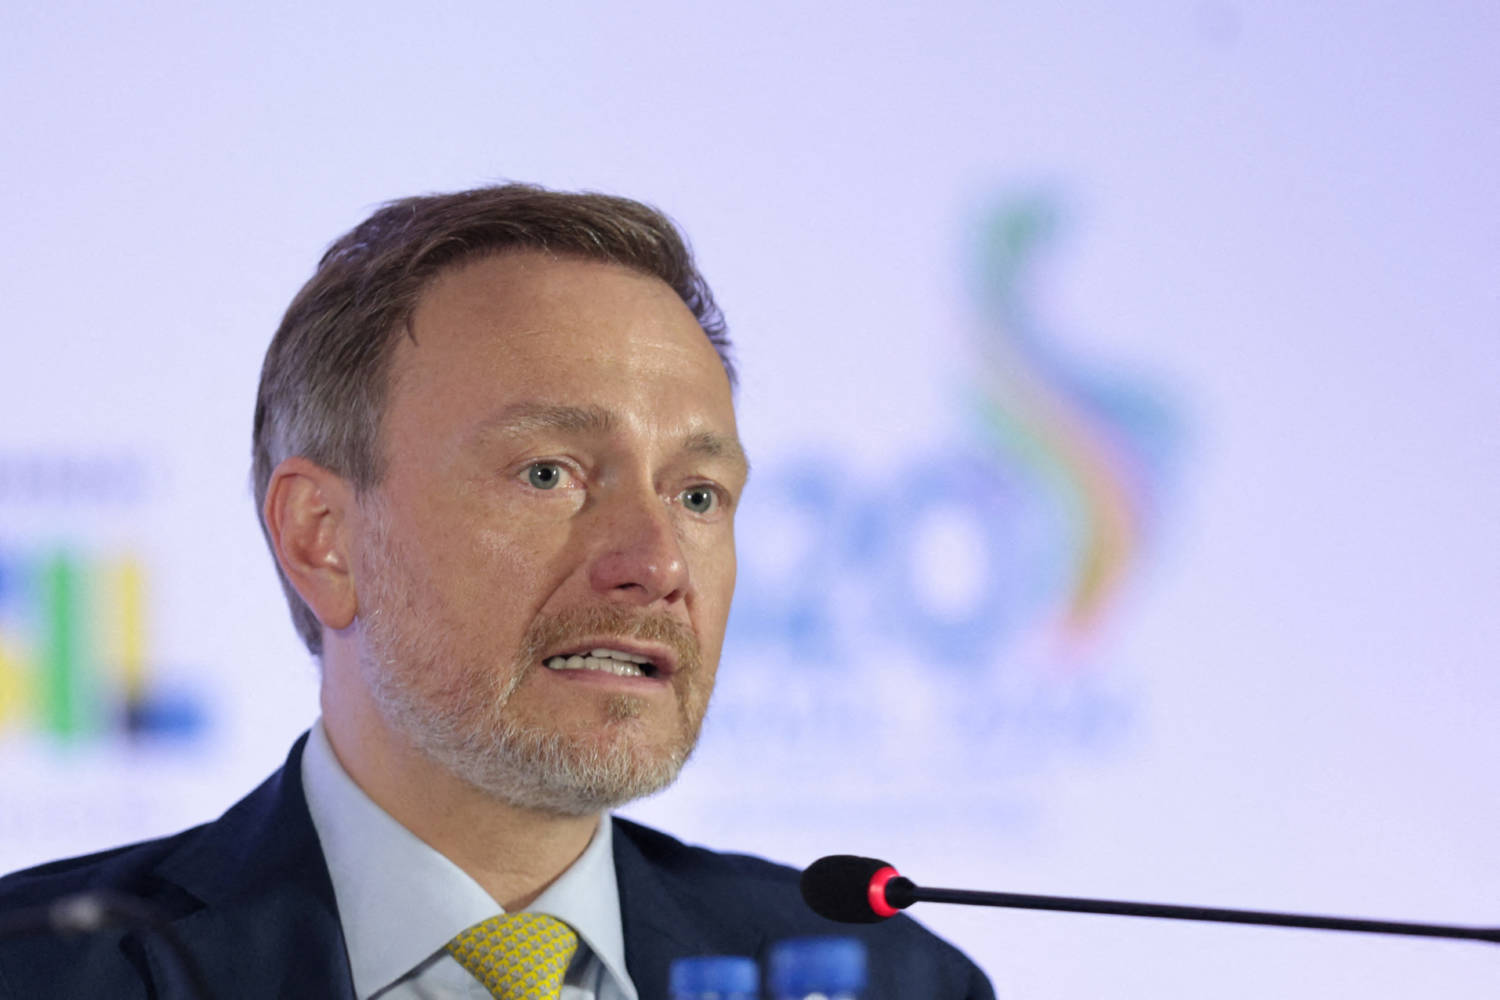 File Photo: Germany's Lindner At A Press Conference In Brazil